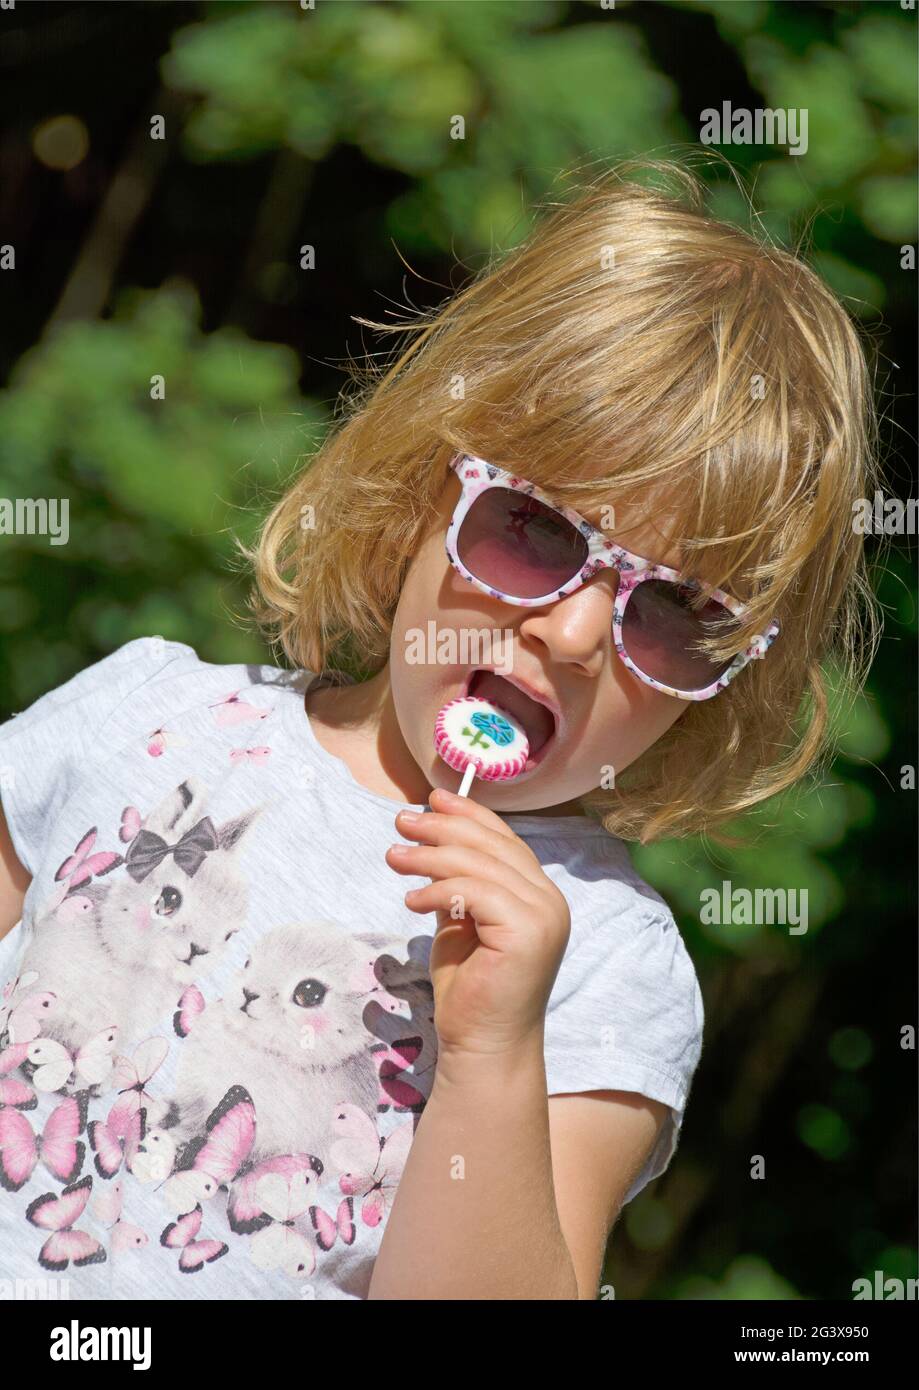 Child with lollipop in nature Stock Photo